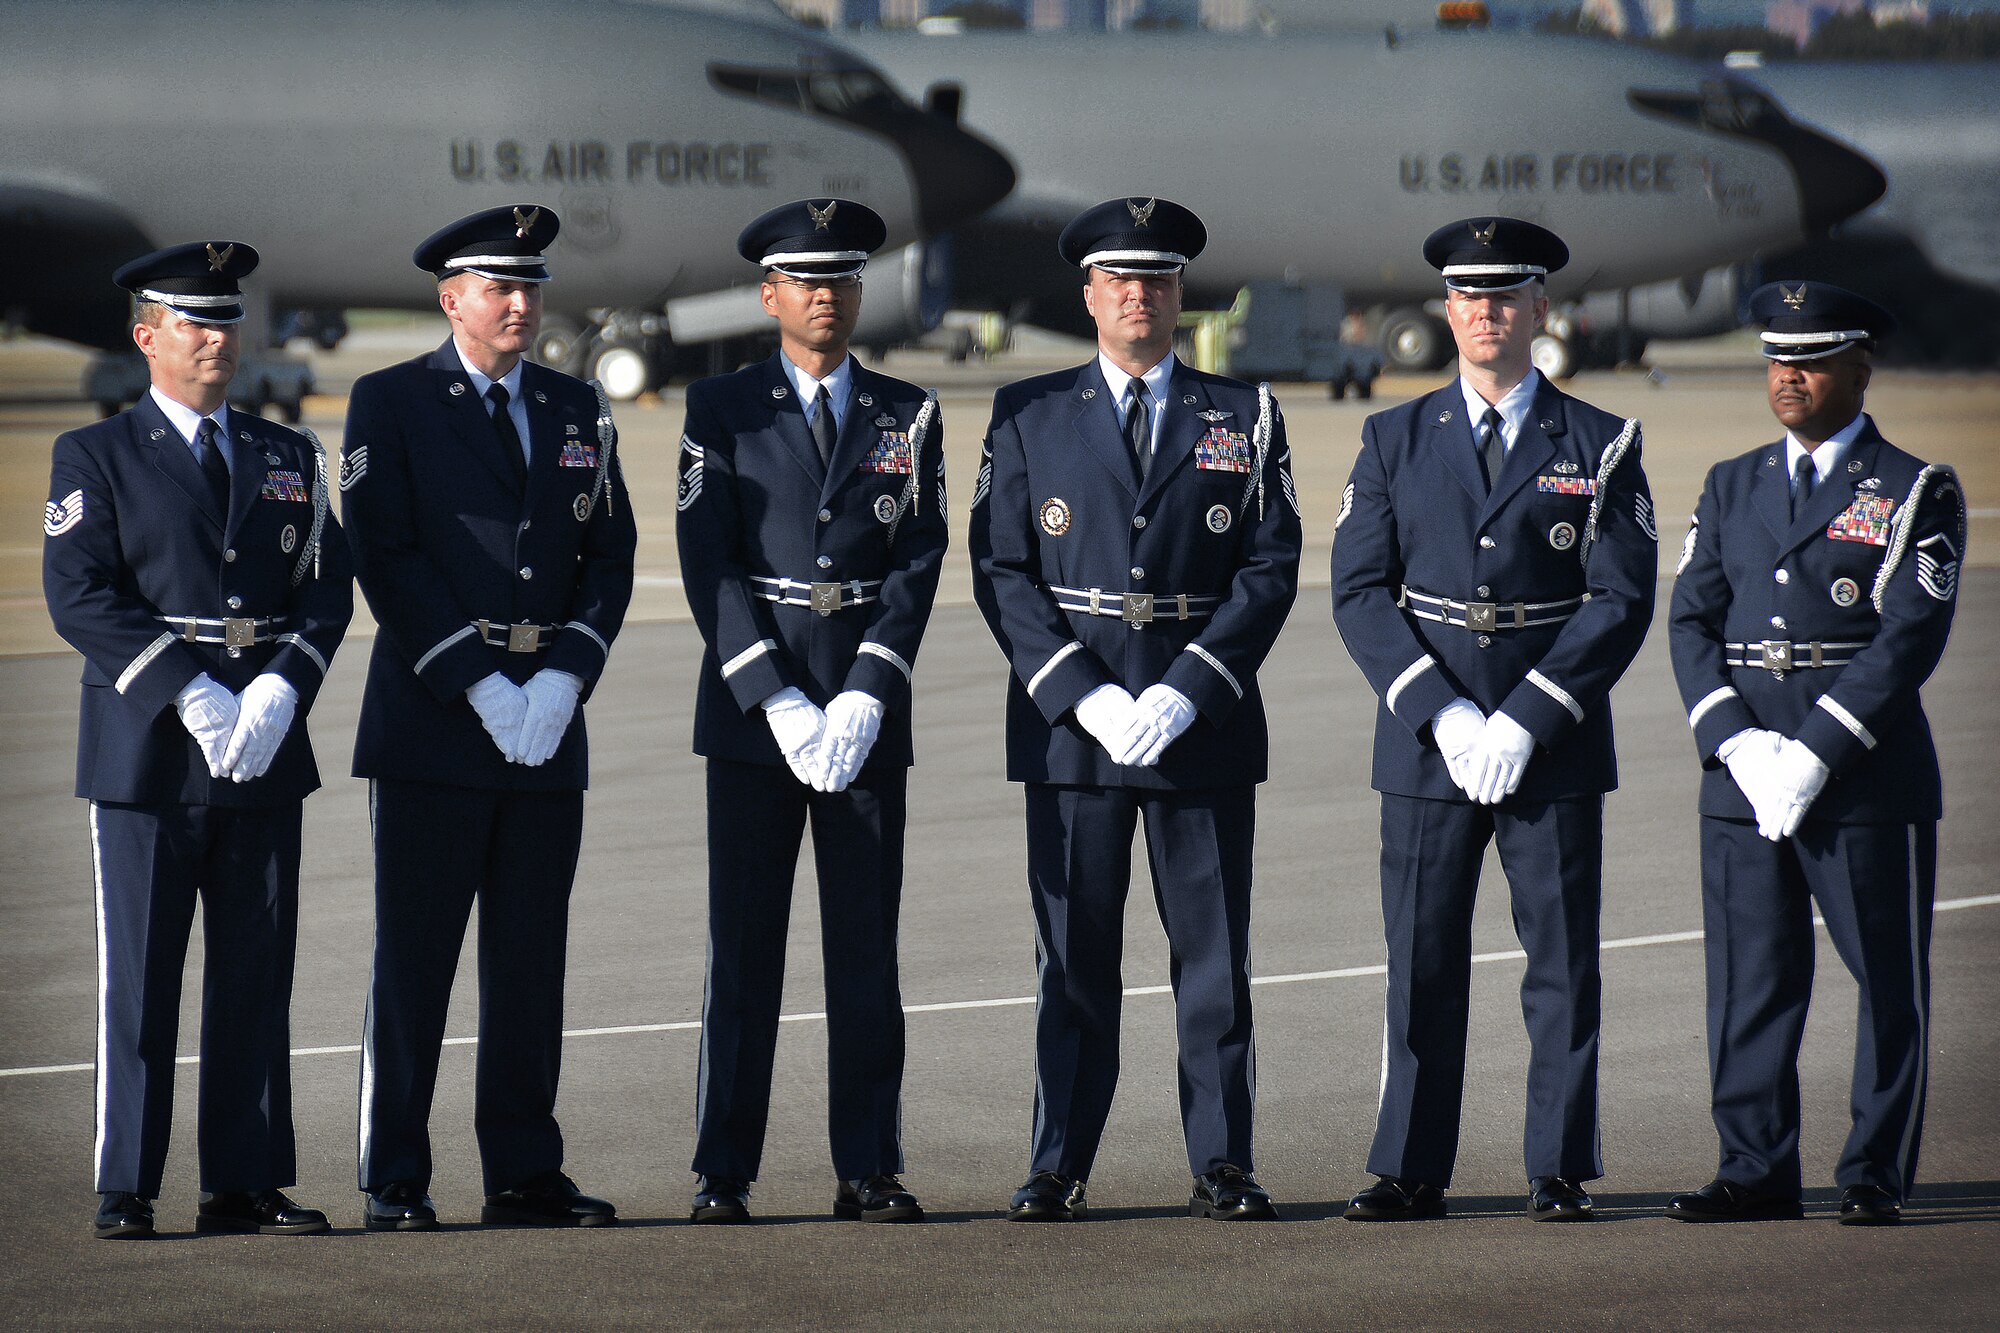 Honor Guard Members from the 117th Air Refueling Wing, Birmingham, Alabama pose for a group photo on the flight line September 11, 2013. (U.S. Air National Guard photo by: Senior Master Sgt. Ken Johnson/Released)